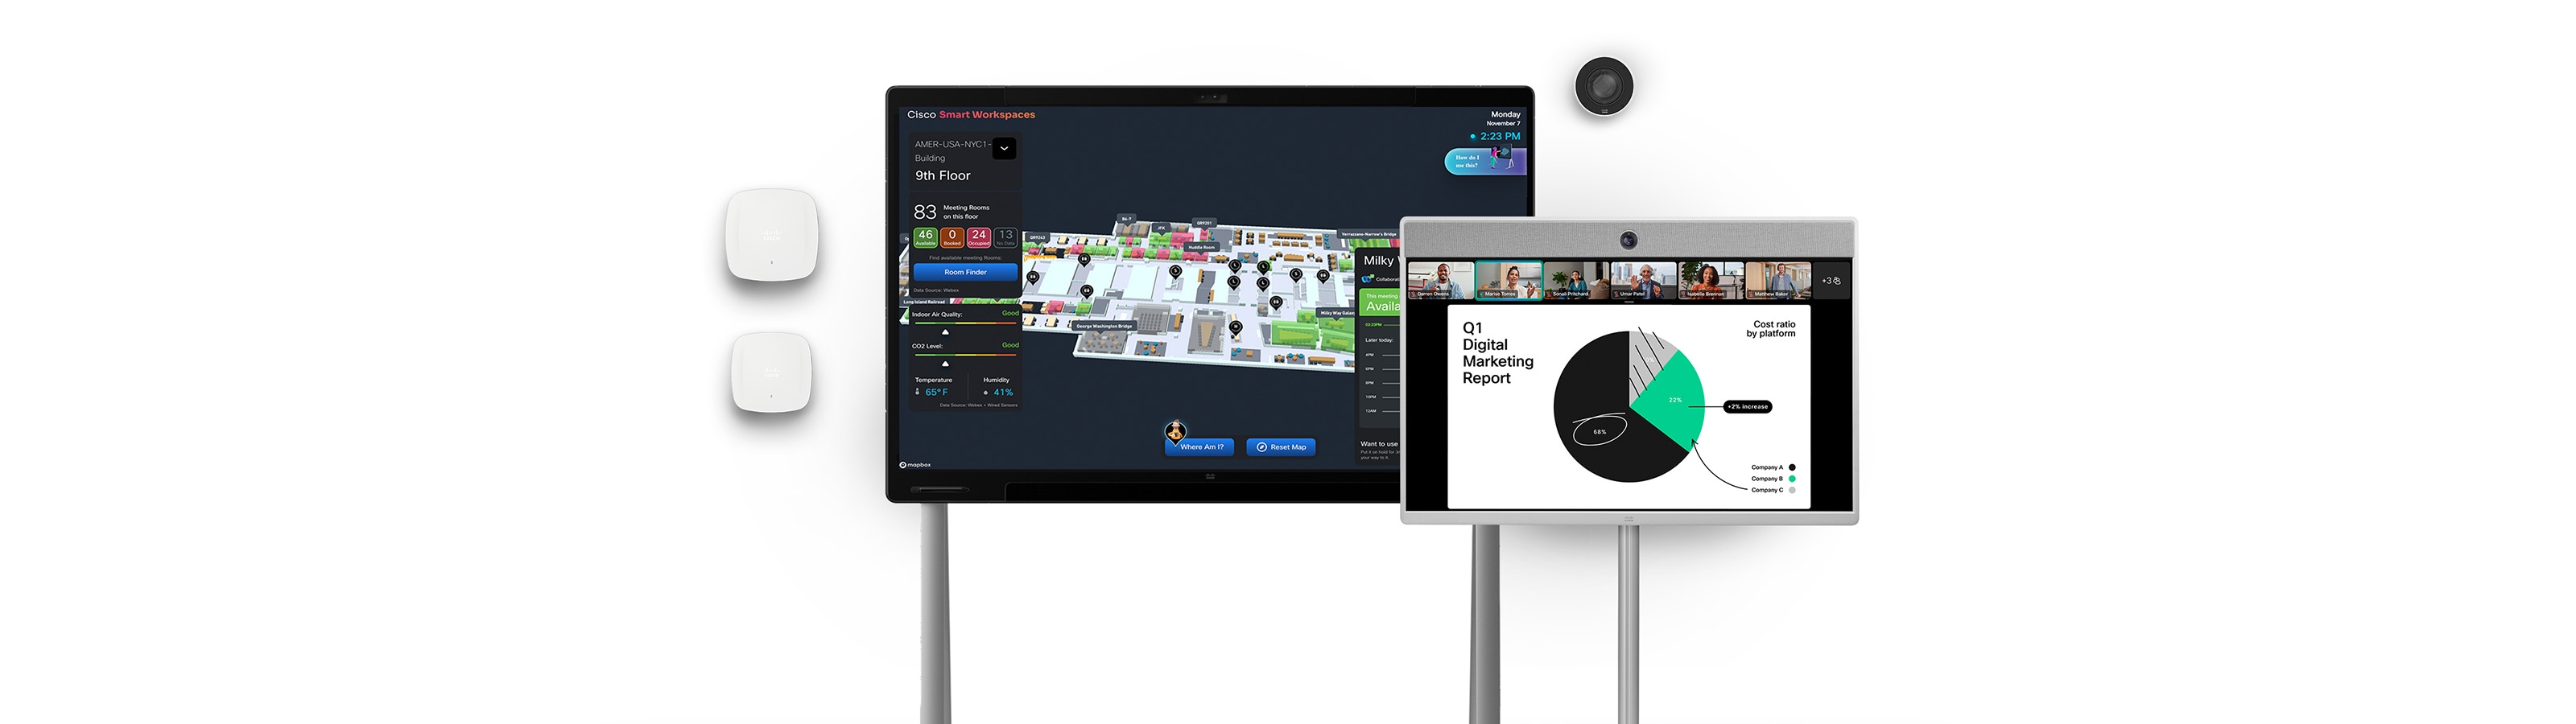 Hybrid place technology, including an illustration of Cisco Spaces, Webex video conferencing, and Meraki hardware